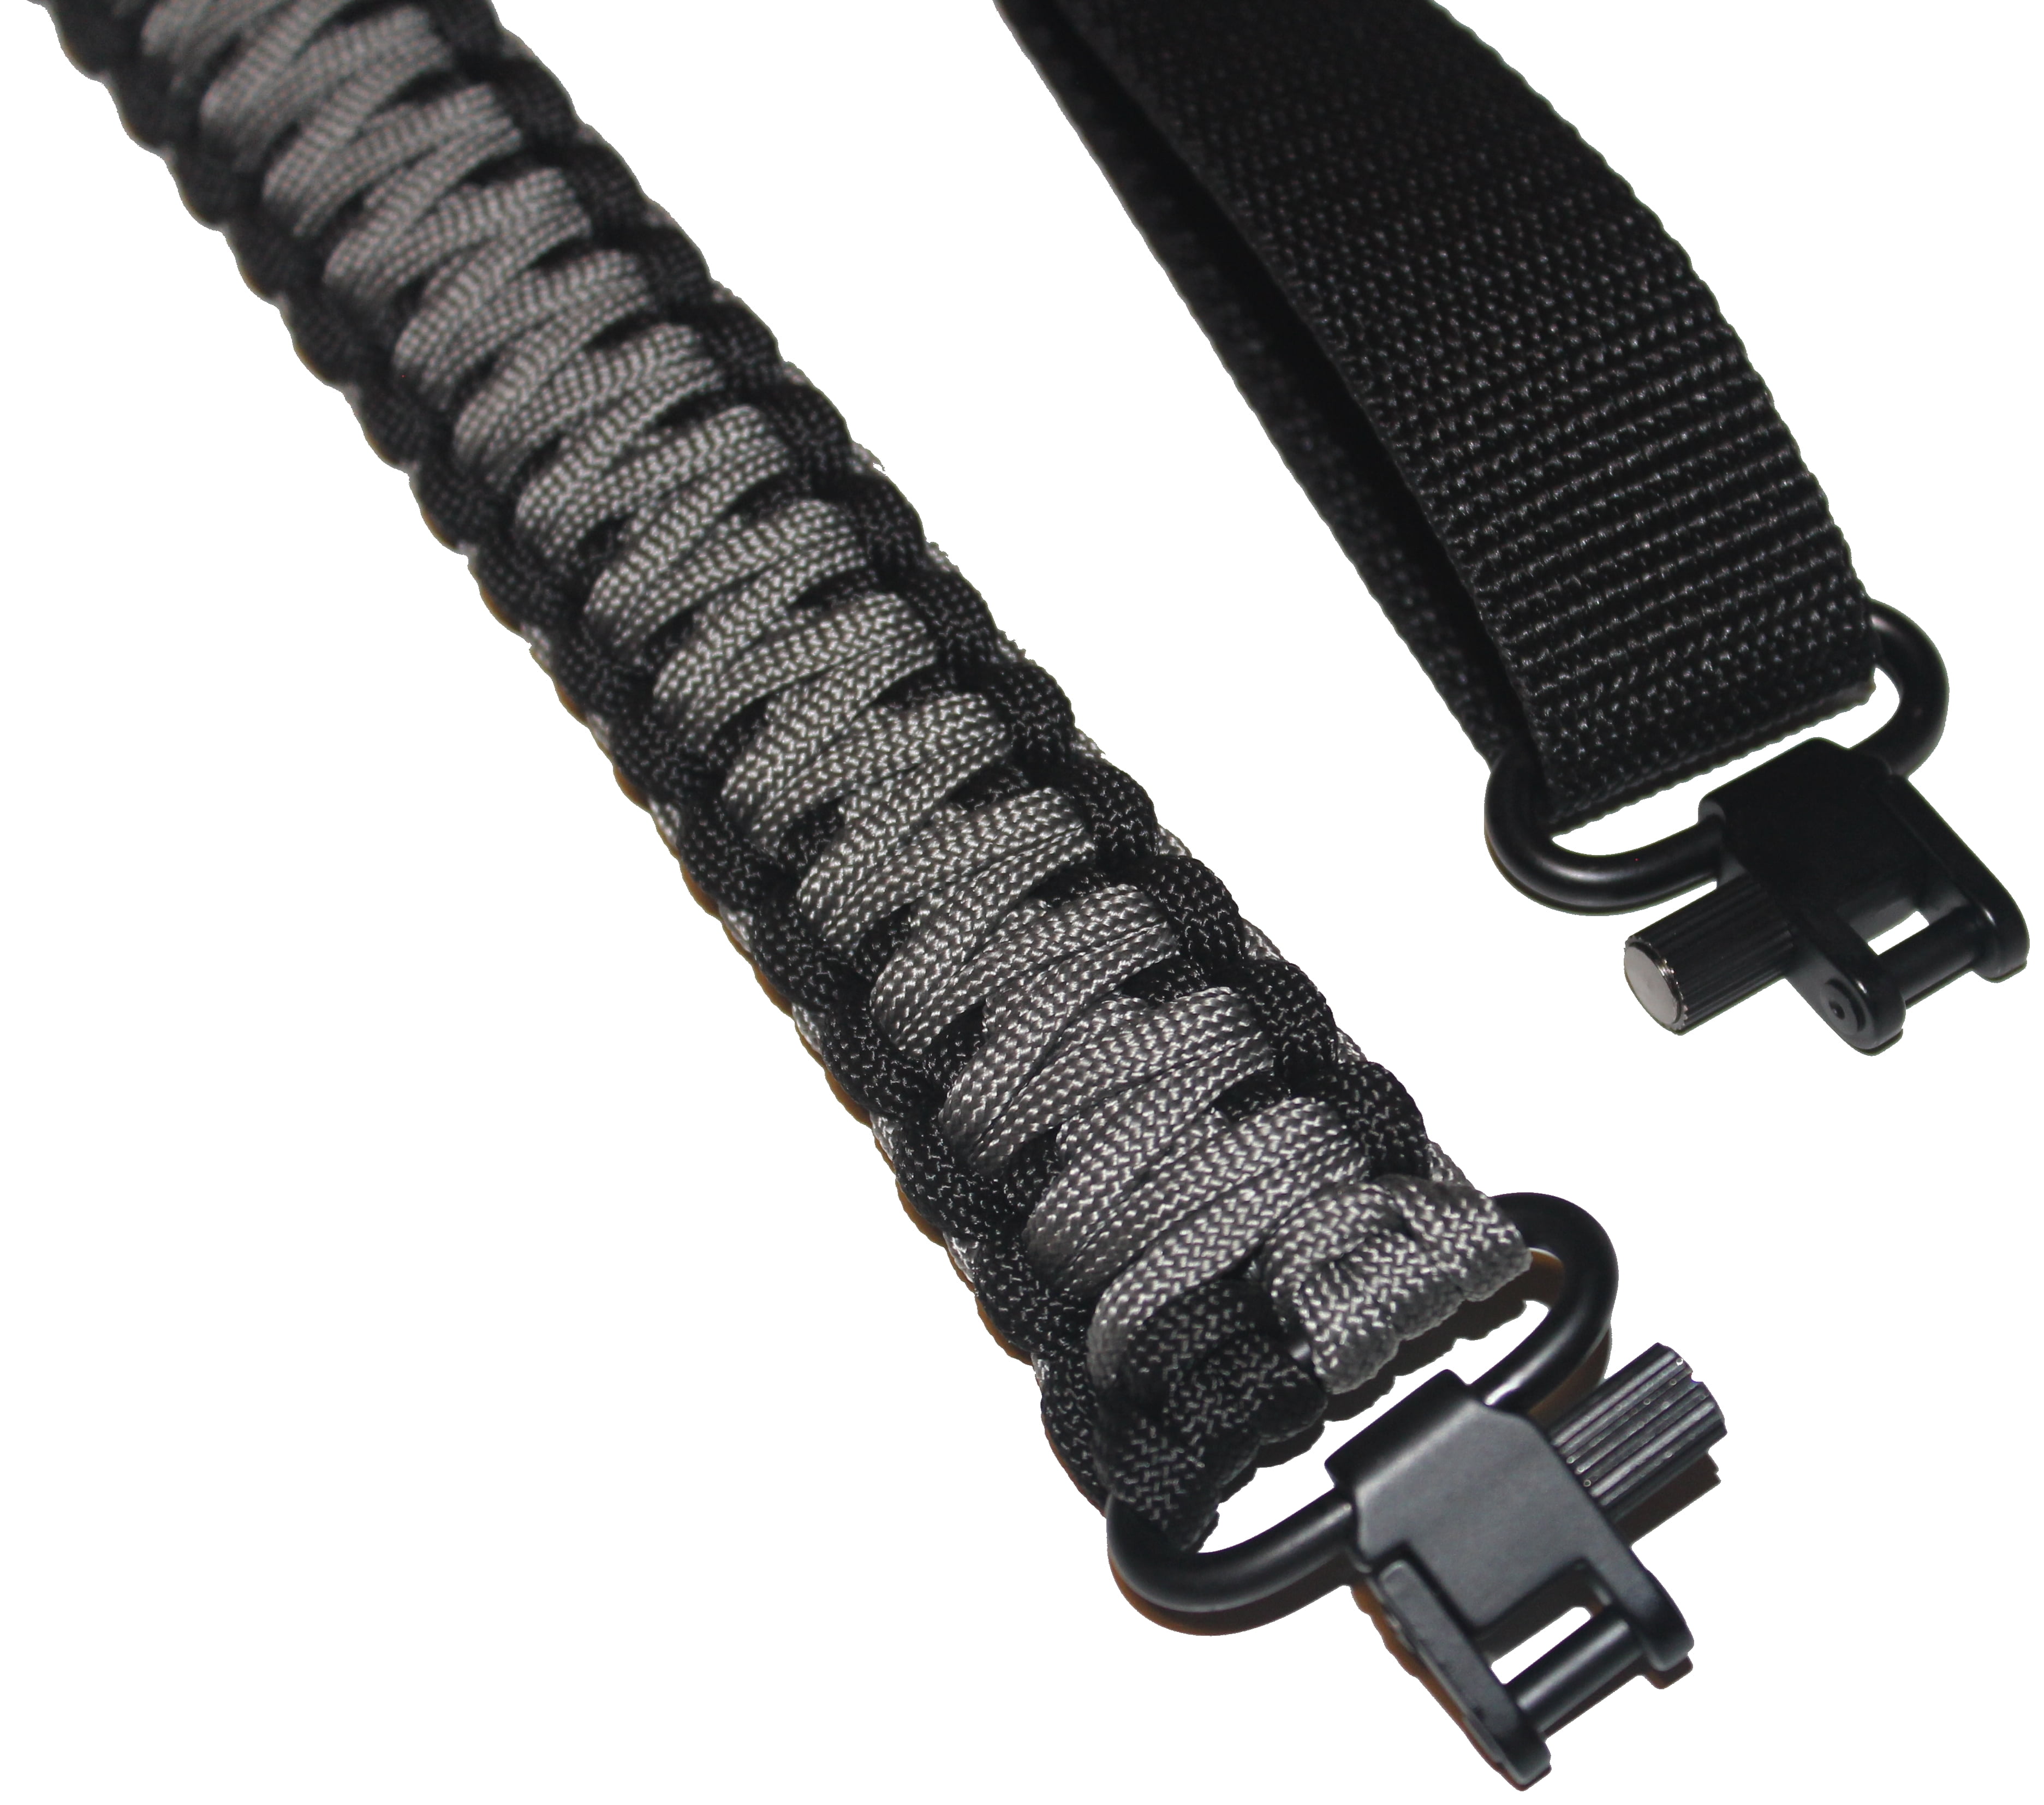 Rifle Gun Sling Leather Shotgun Straps Adjustable Tactical Two Point Sling New